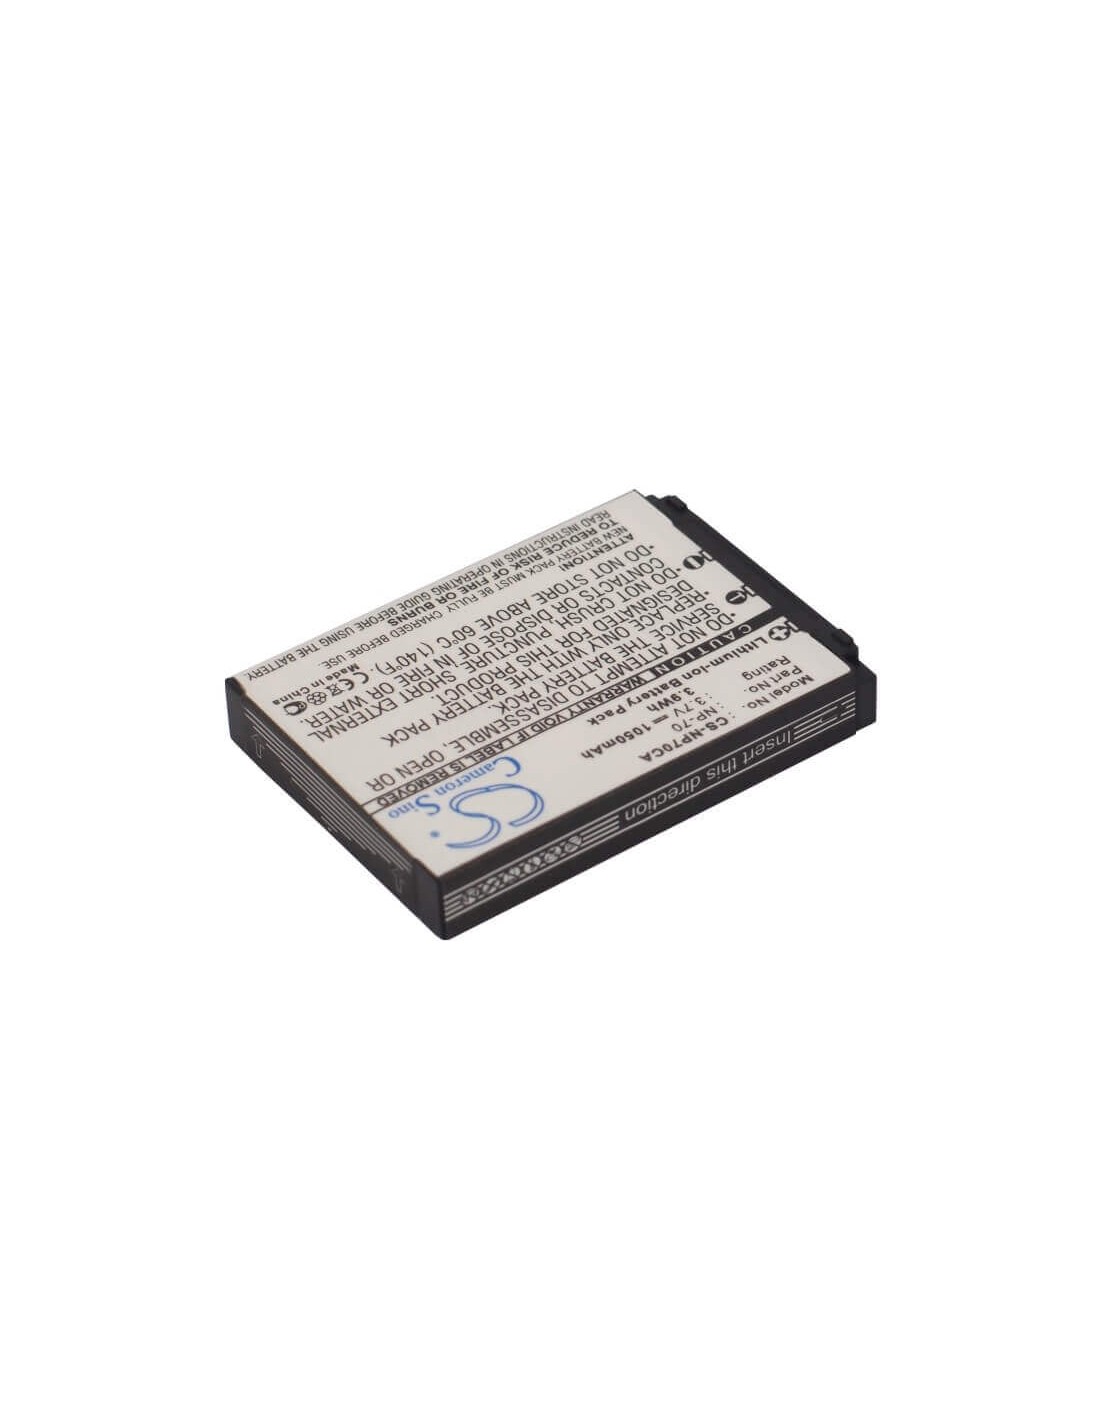 Battery for Casio Exilim Zoom Ex-z150, Exilim 3.7V, 1050mAh - 3.89Wh